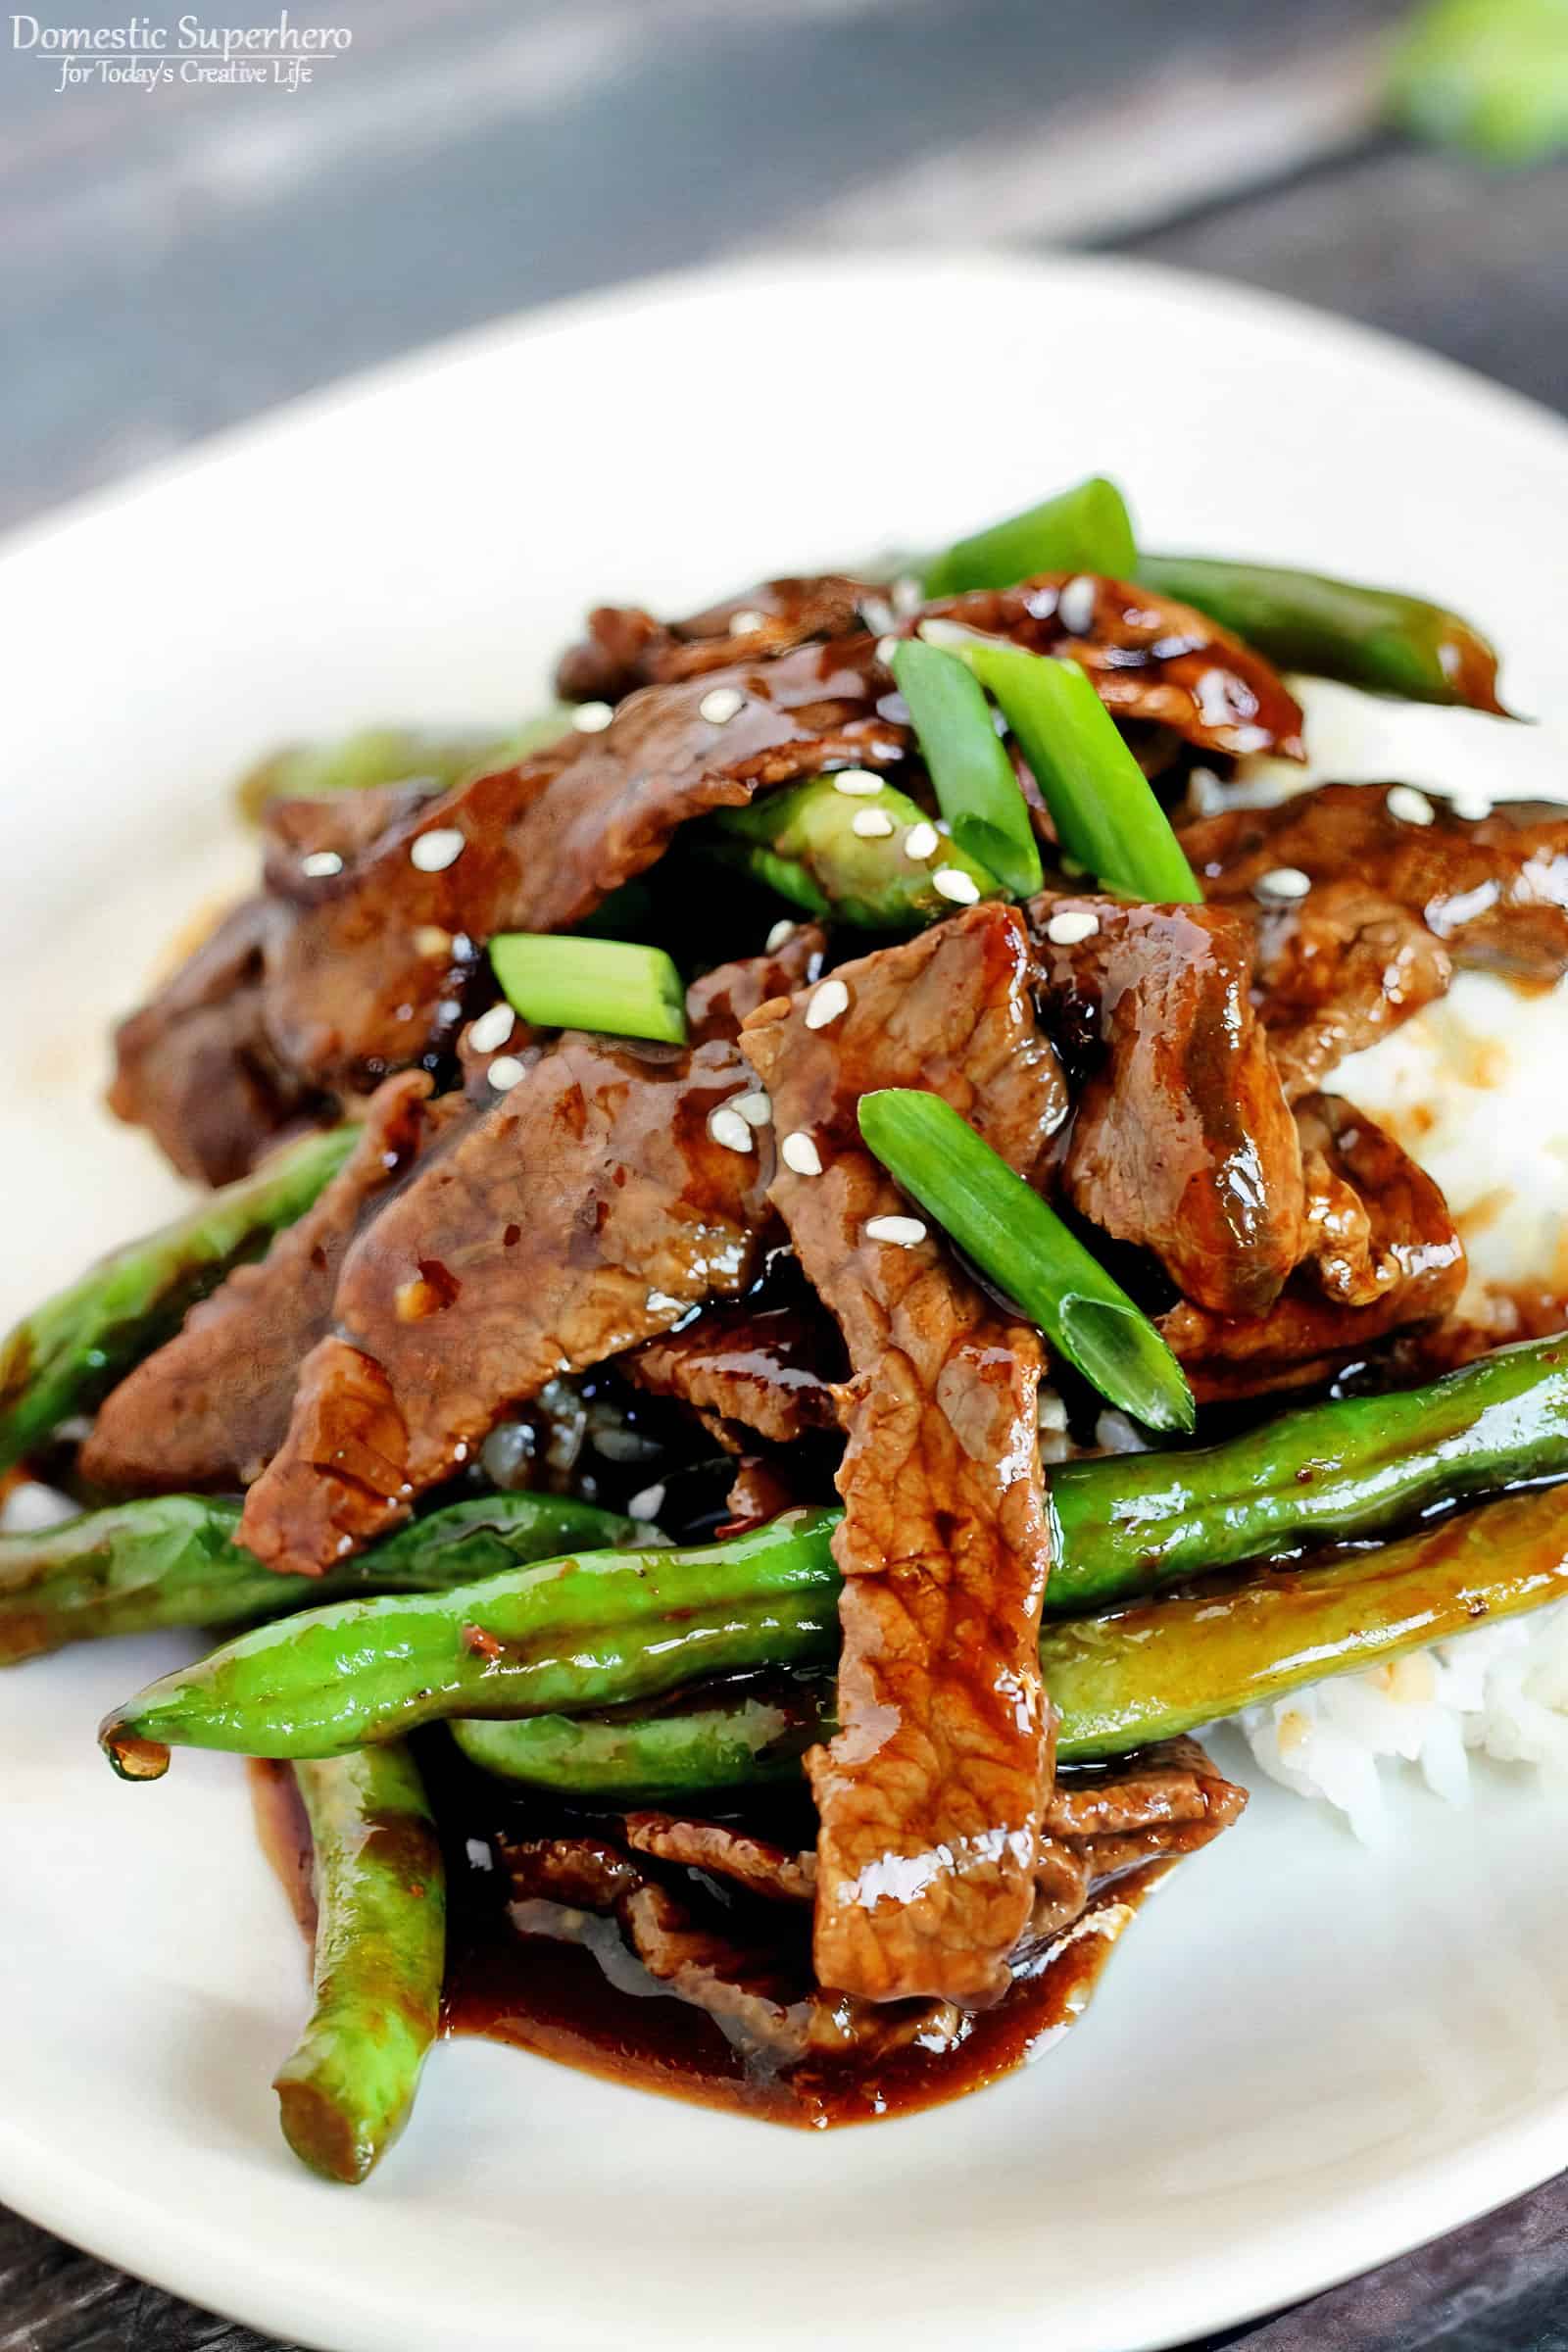 Chinese Beef Green Beans Stir Fry | This quick and easy Asian beef and green bean stir fry dish is healthy and delicious. It will be a quickly become a family favorite! See recipe on TodaysCreativeLife.com